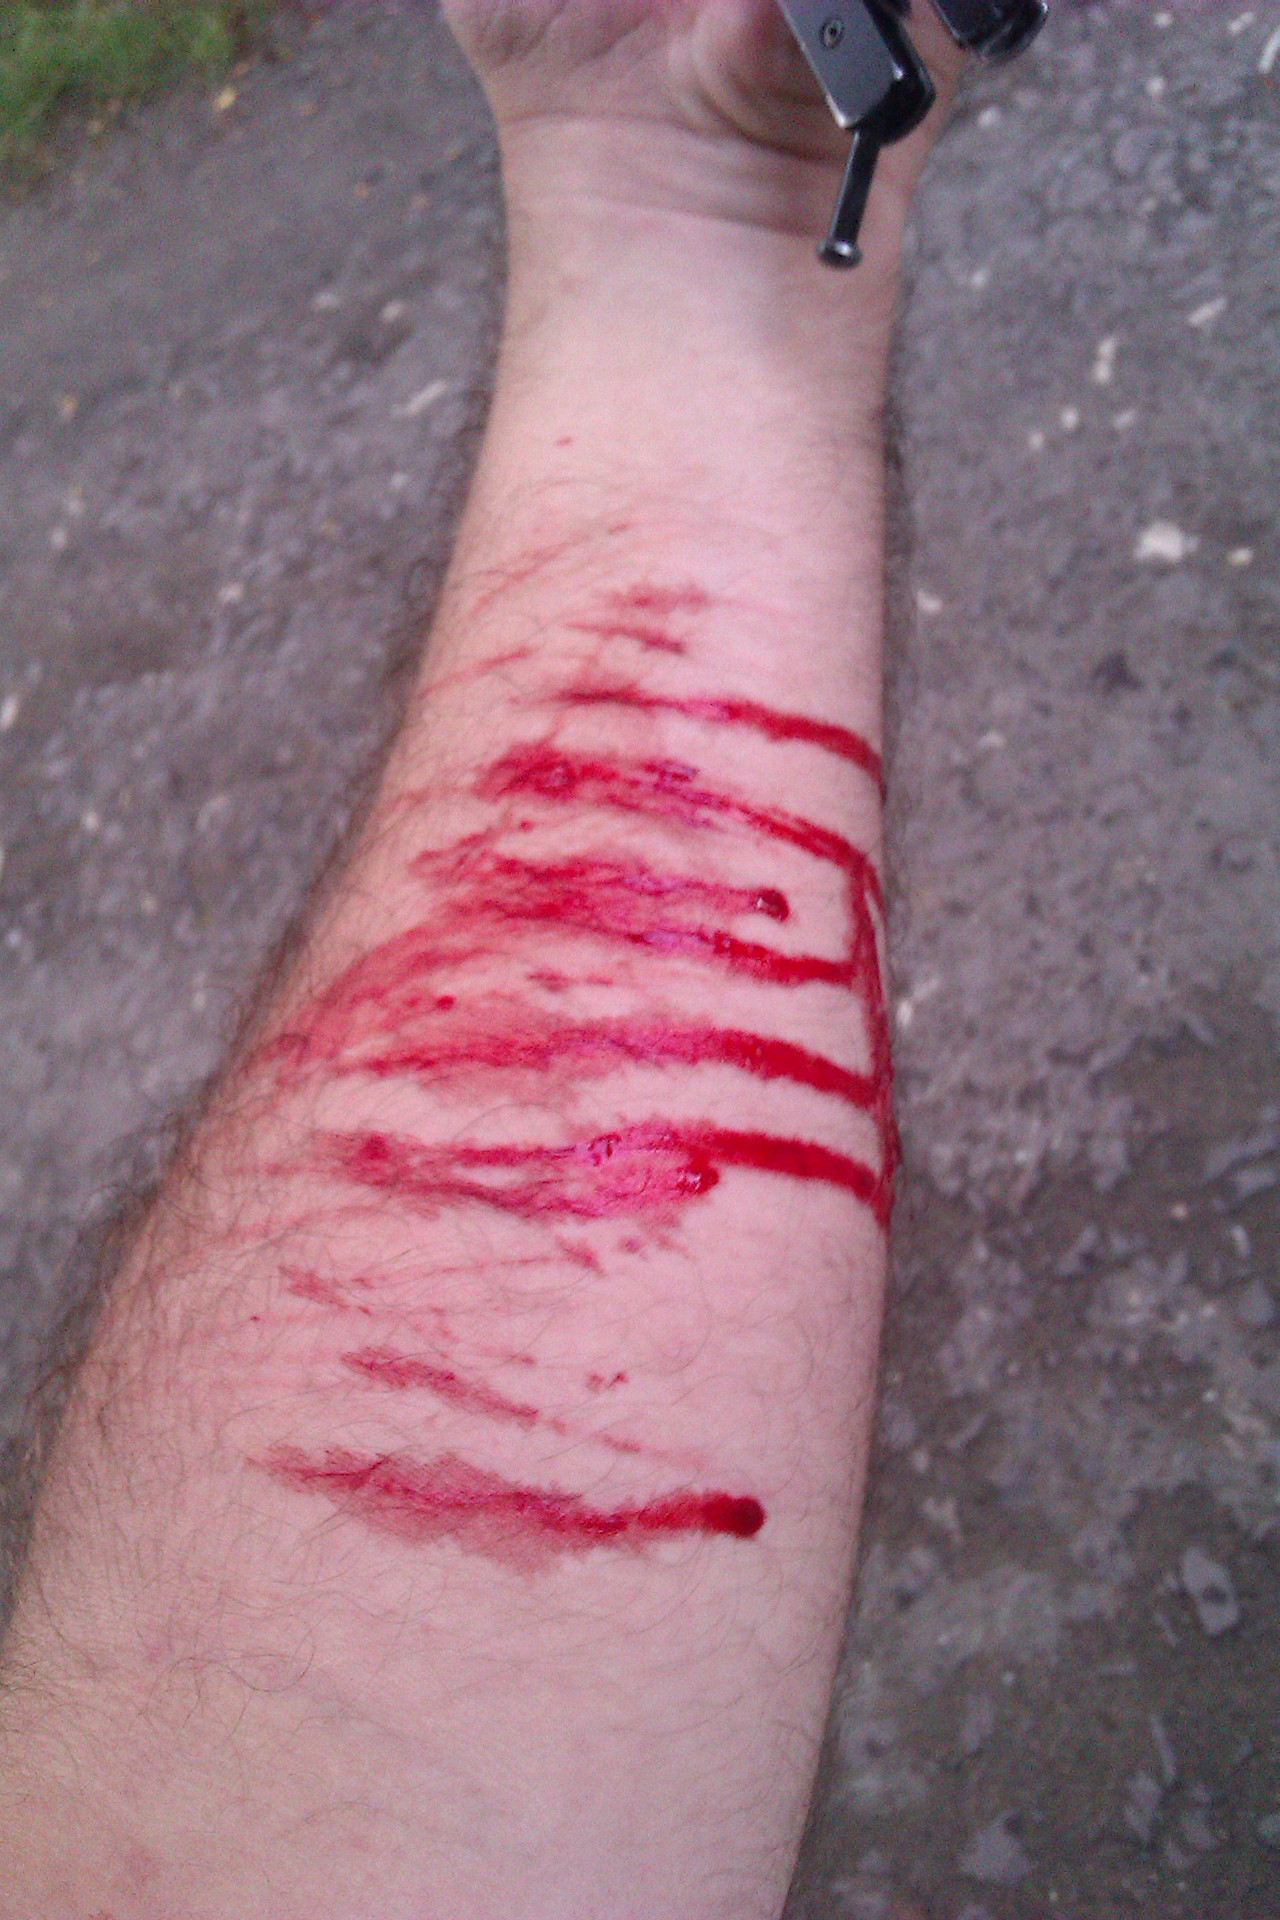 an image of self harm cuts on a forearm